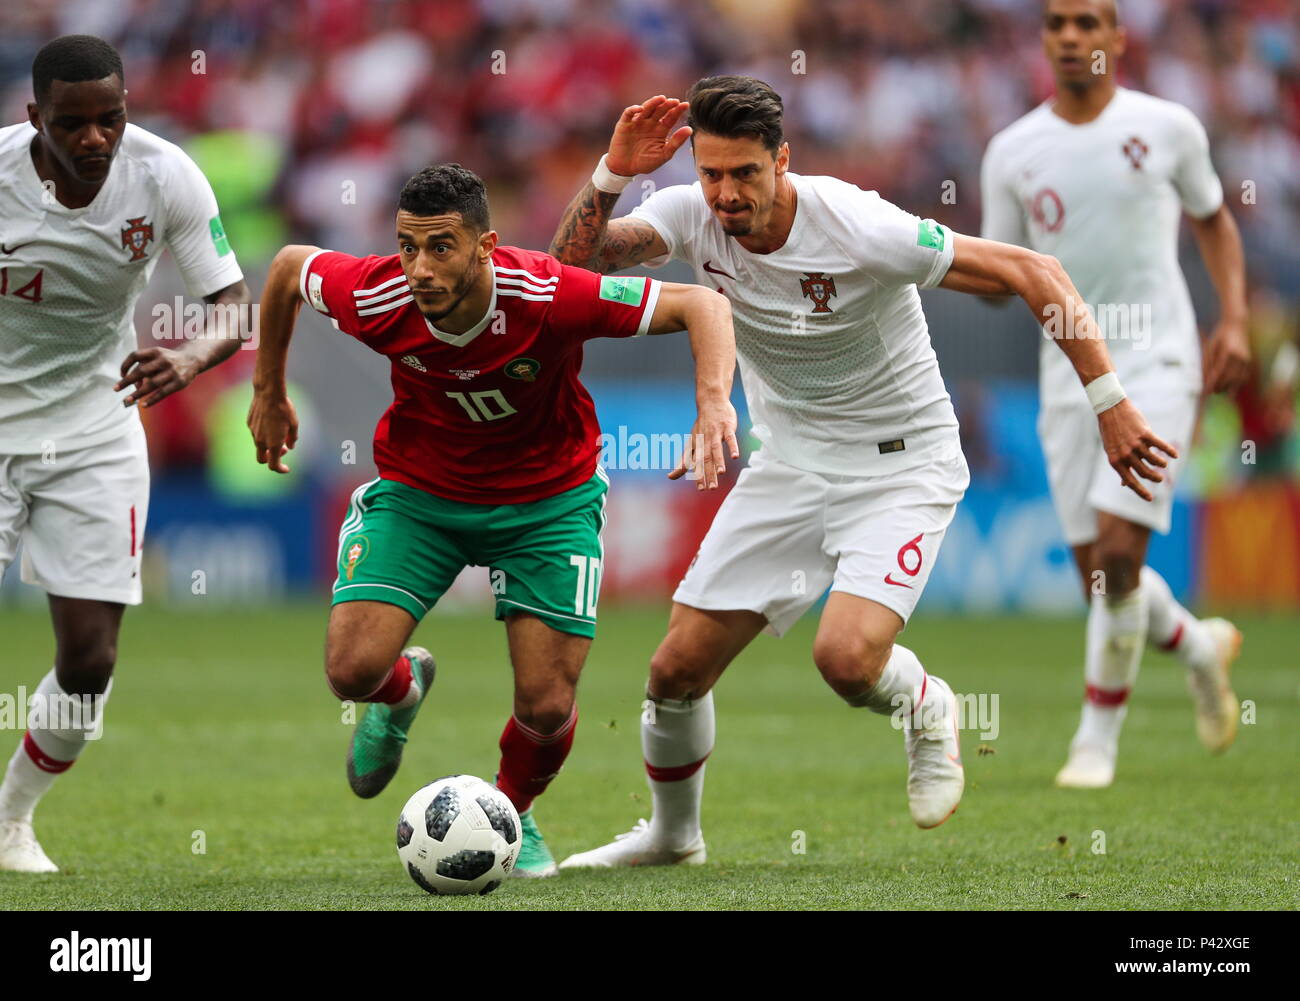 moscow-russia-20th-june-2018-moscow-russia-june-20-2018-portugals-william-carvalho-l-jose-fonte-r-and-moroccos-younes-belhanda-c-in-their-2018-fifa-world-cup-group-b-round-2-football-match-at-luzhniki-stadium-portugal-won-the-game-10-mikhail-tereshchenkotass-credit-itar-tass-news-agencyalamy-live-news-P42XGE.jpg